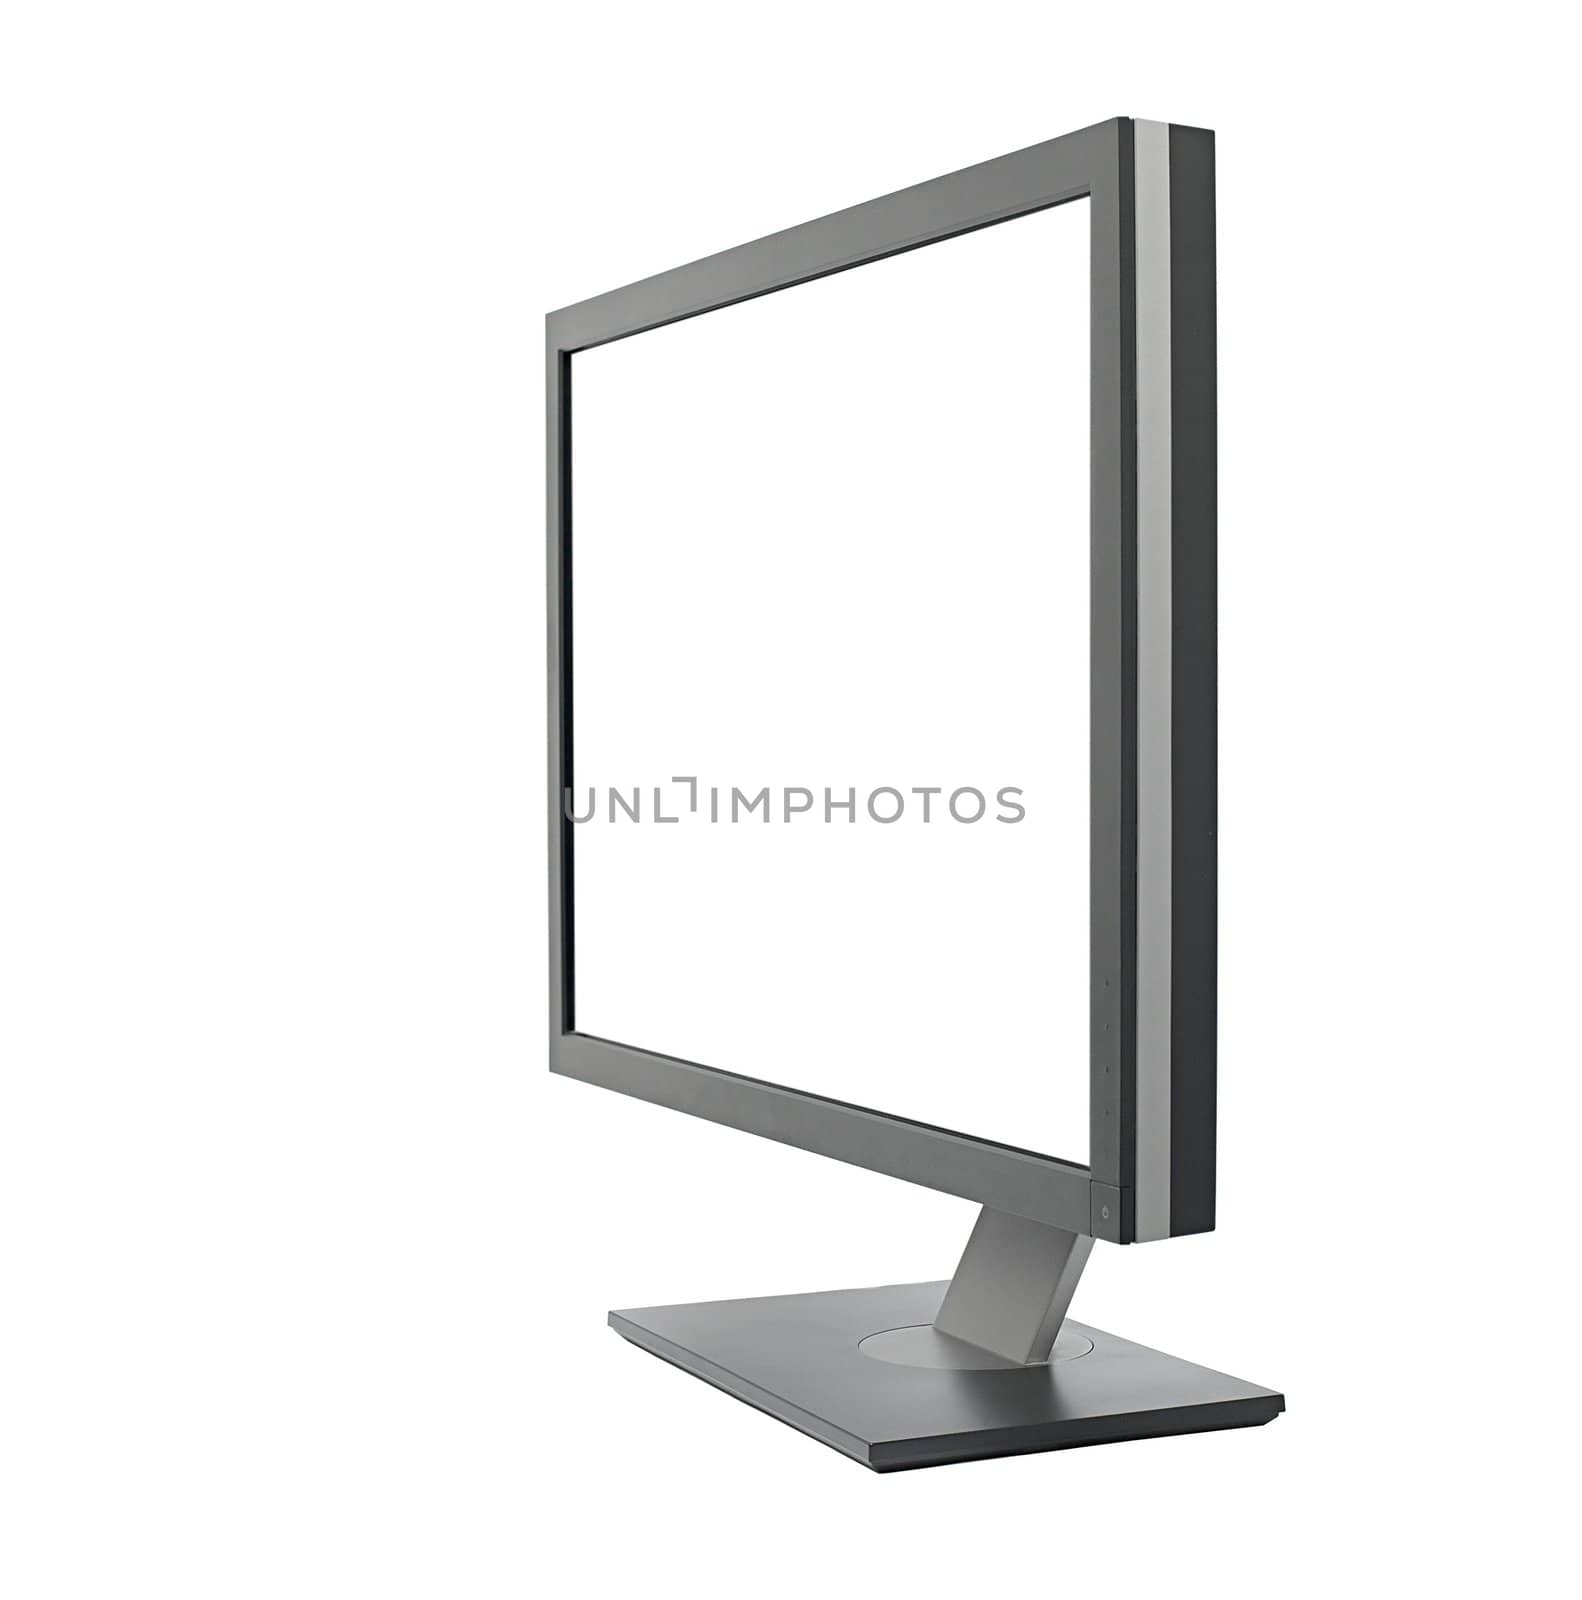 LCD monitor with blank screen isolated on white